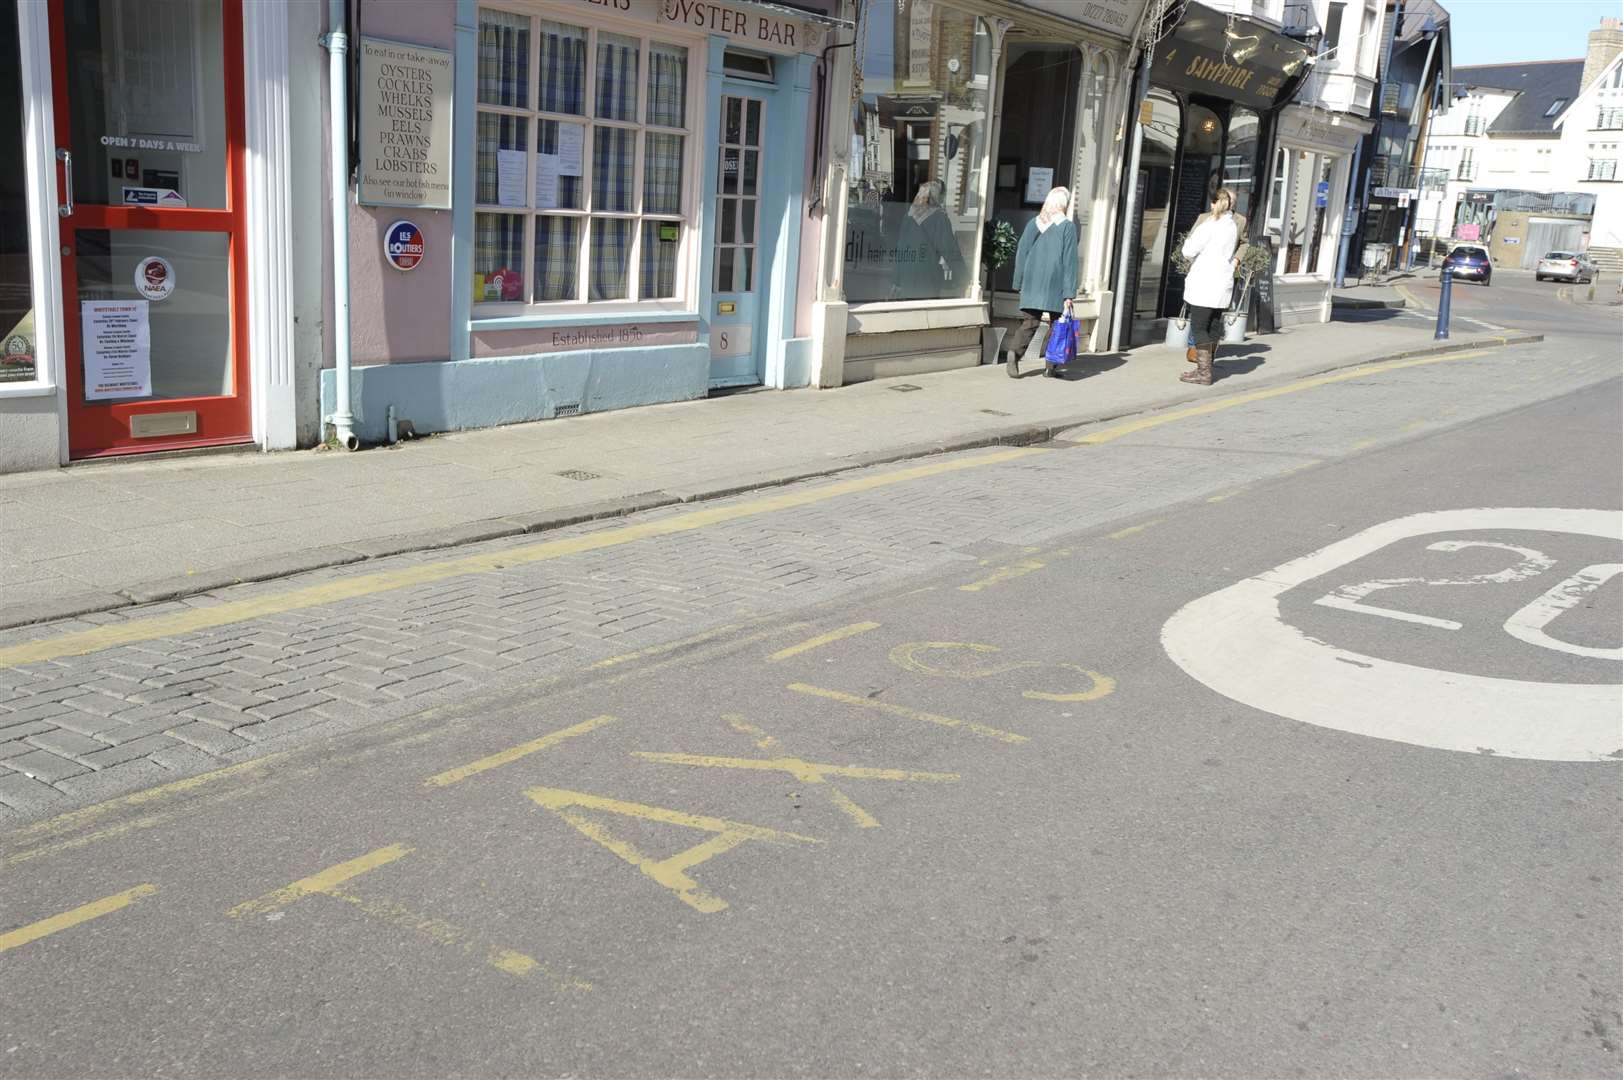 The taxi rank, sign, and faded road markings outside Samphire, High Street, Whitstable.